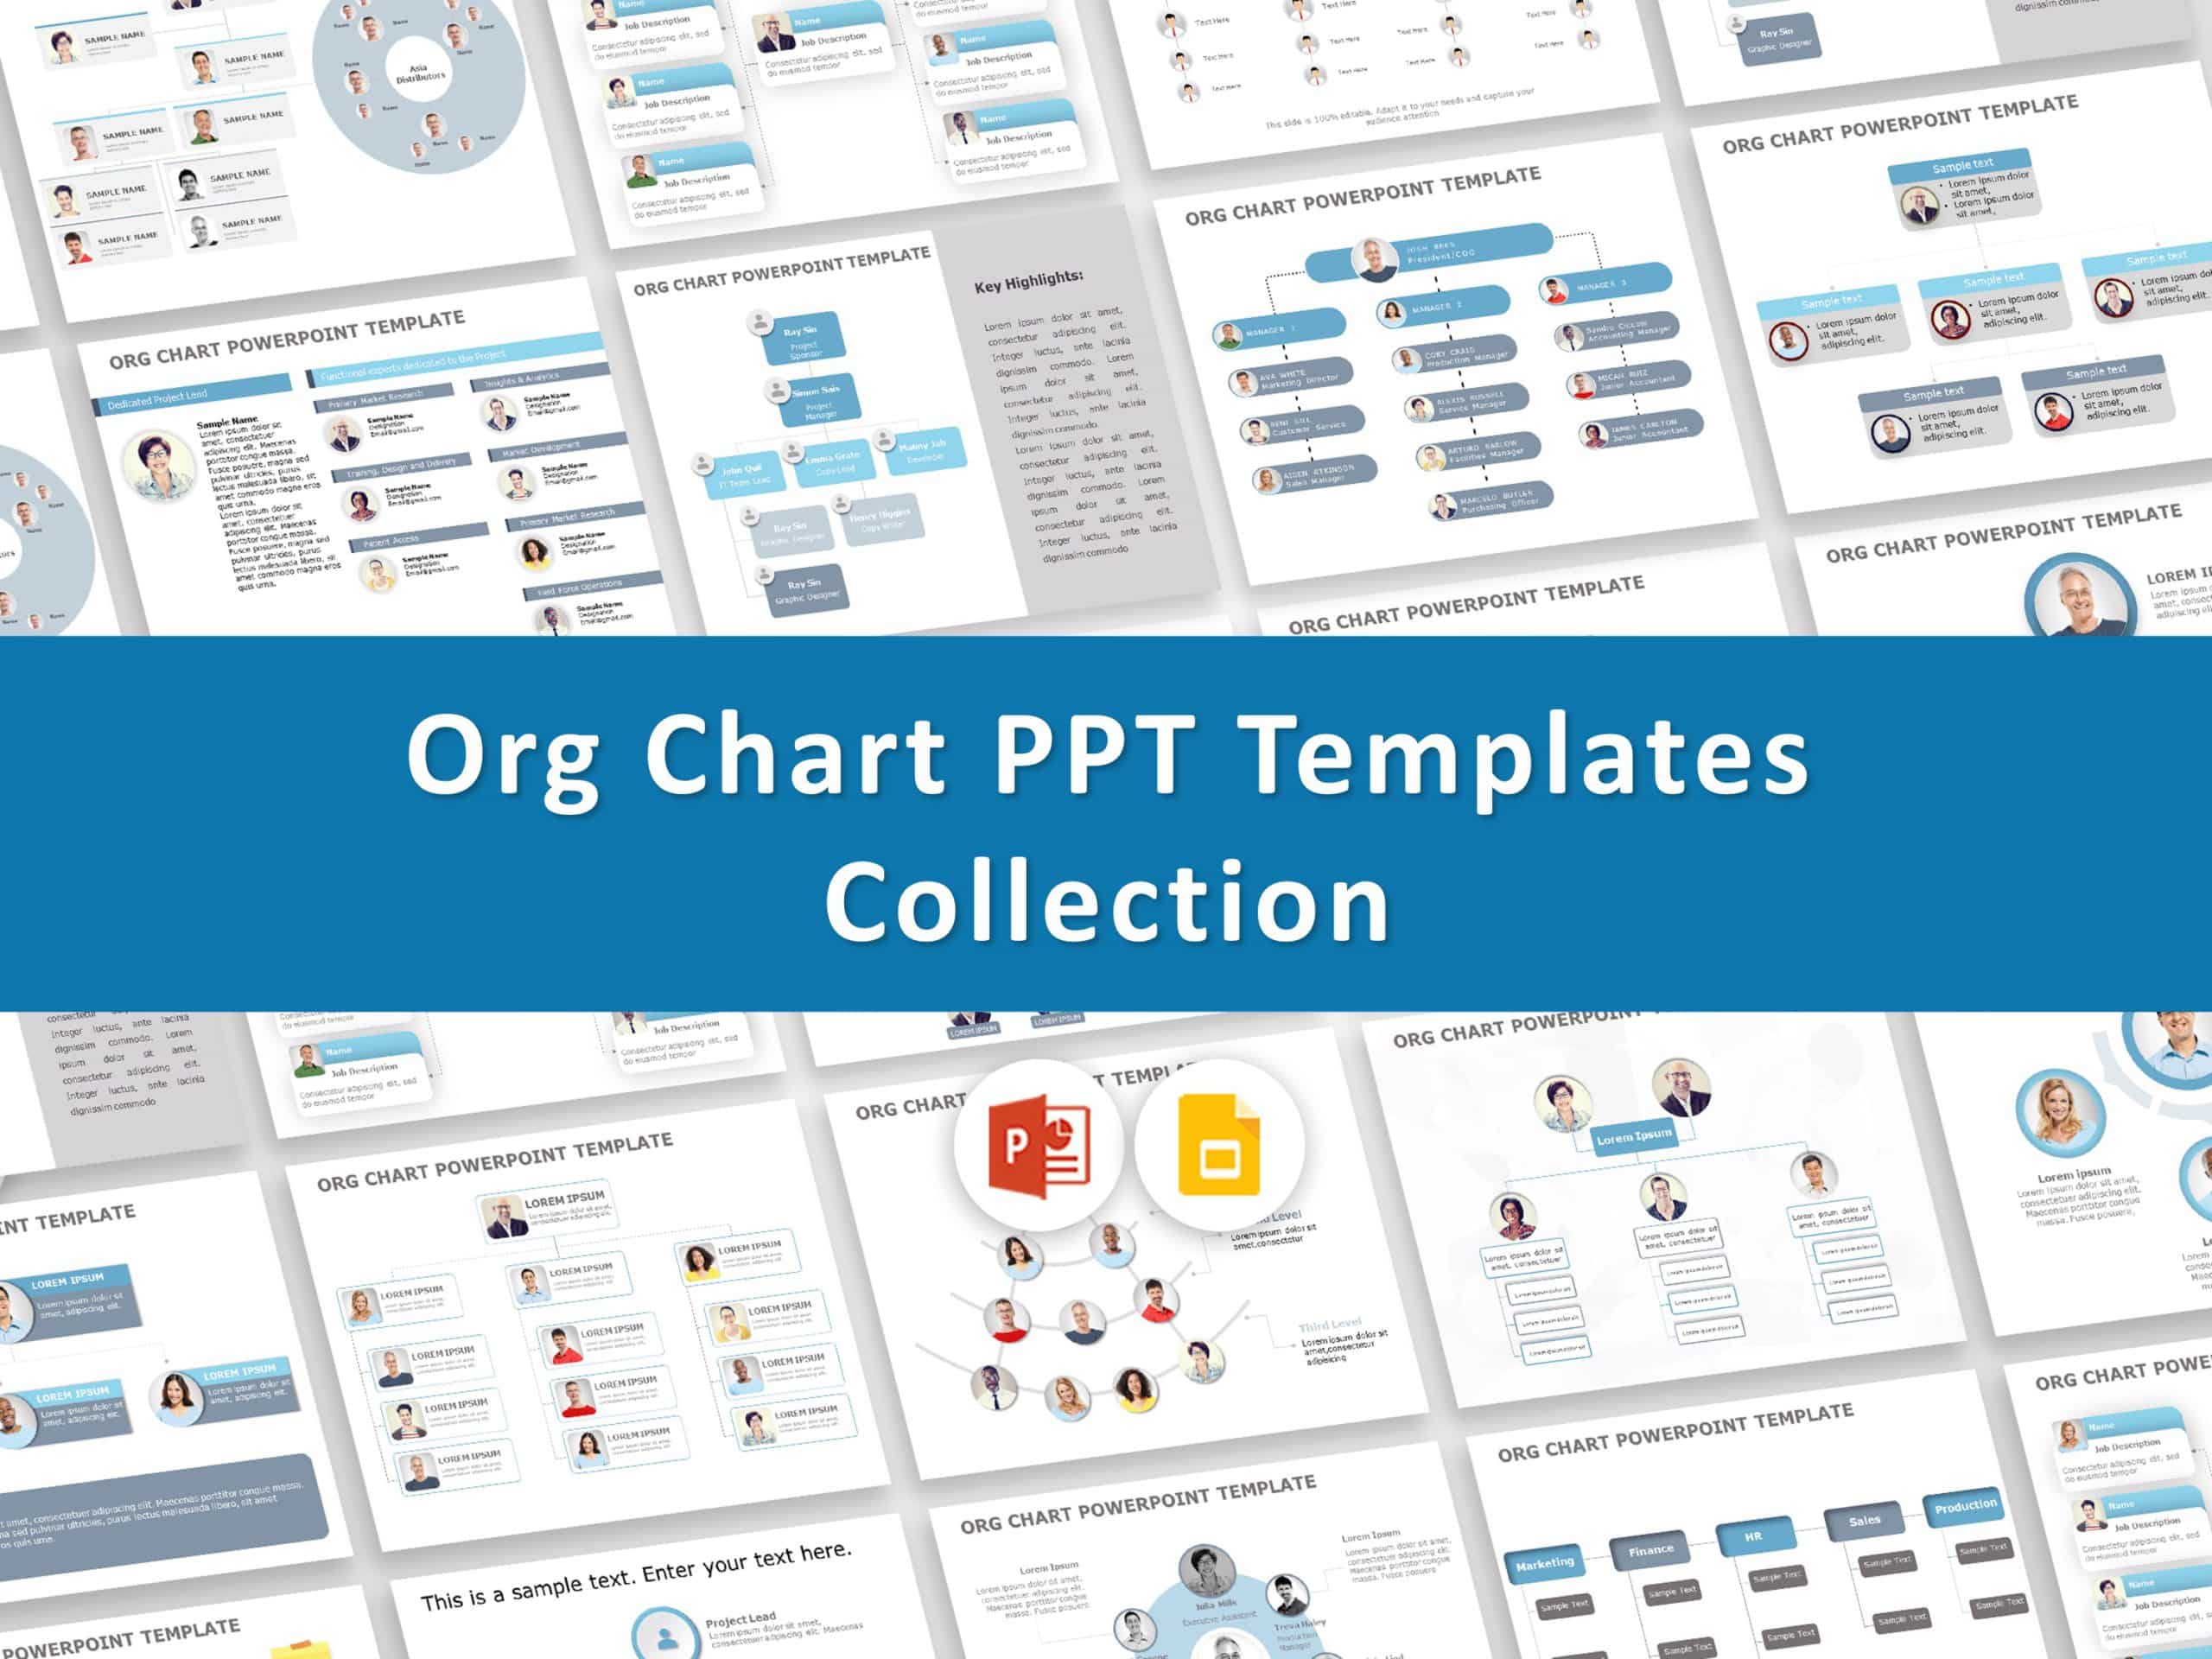 Org Chart PPT Templates